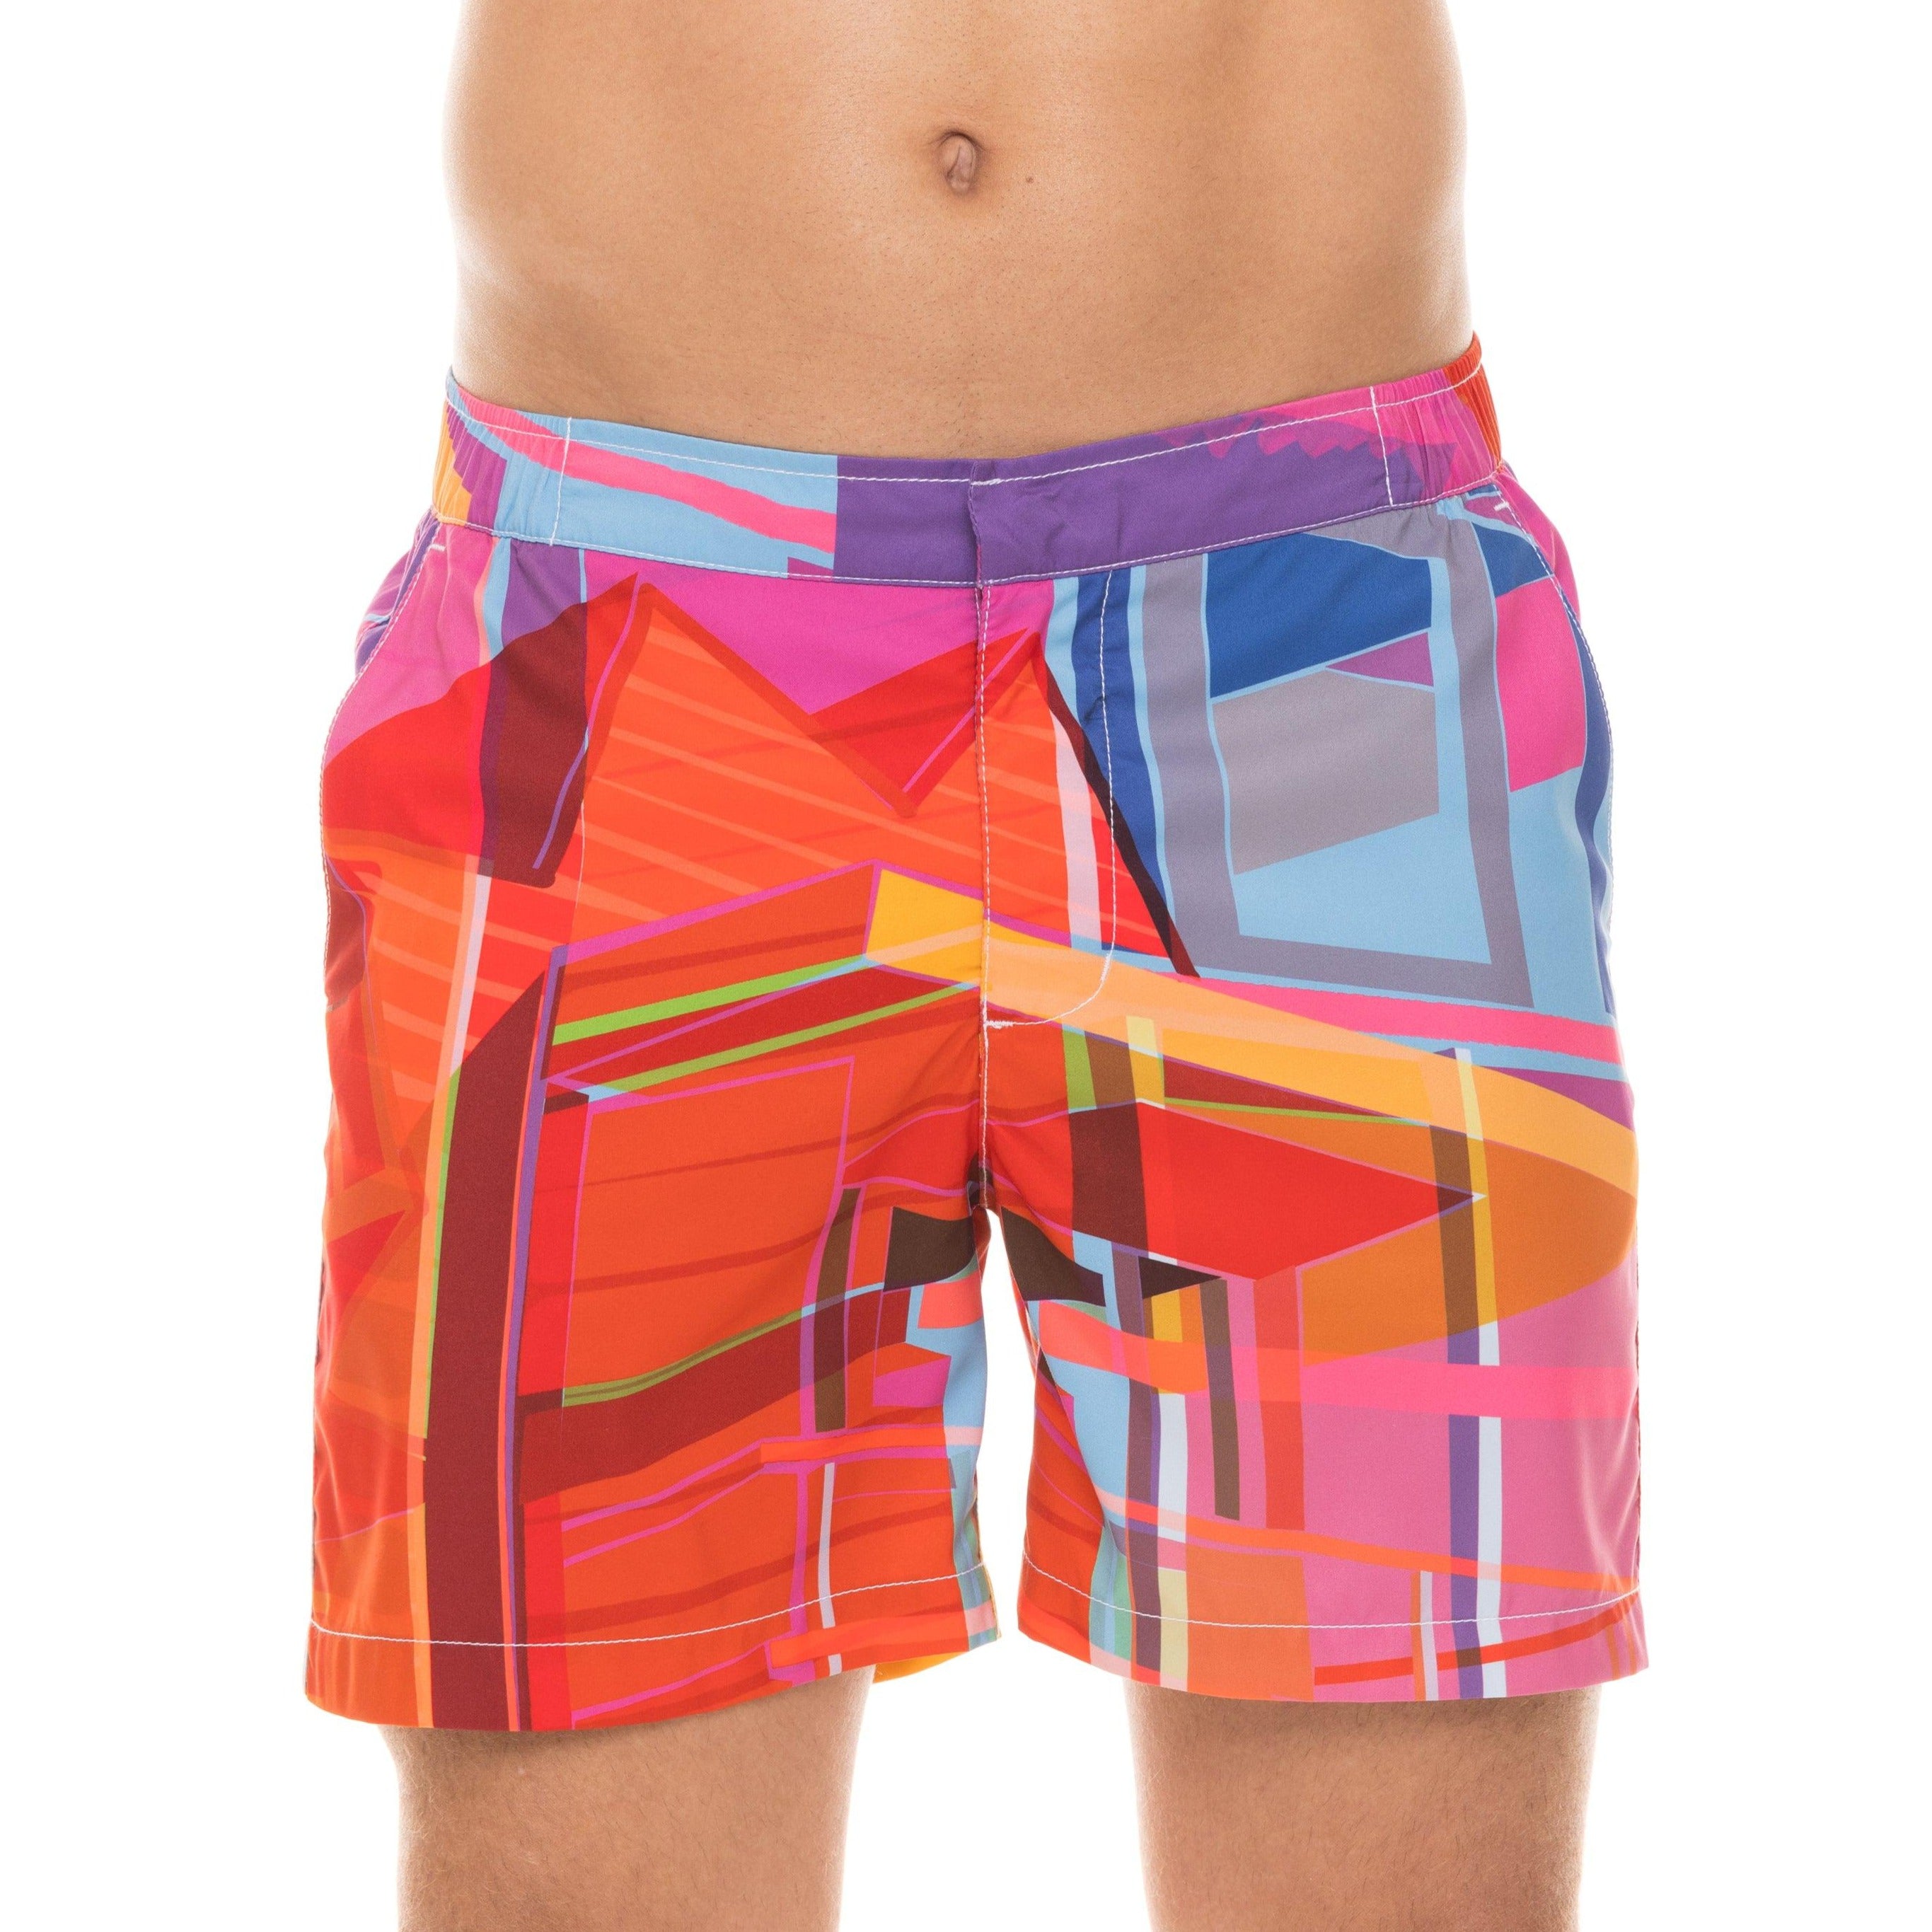 Miami Beach Tower 7 - Men's Swim Shorts with Mesh Lining | Le Club – Le ...